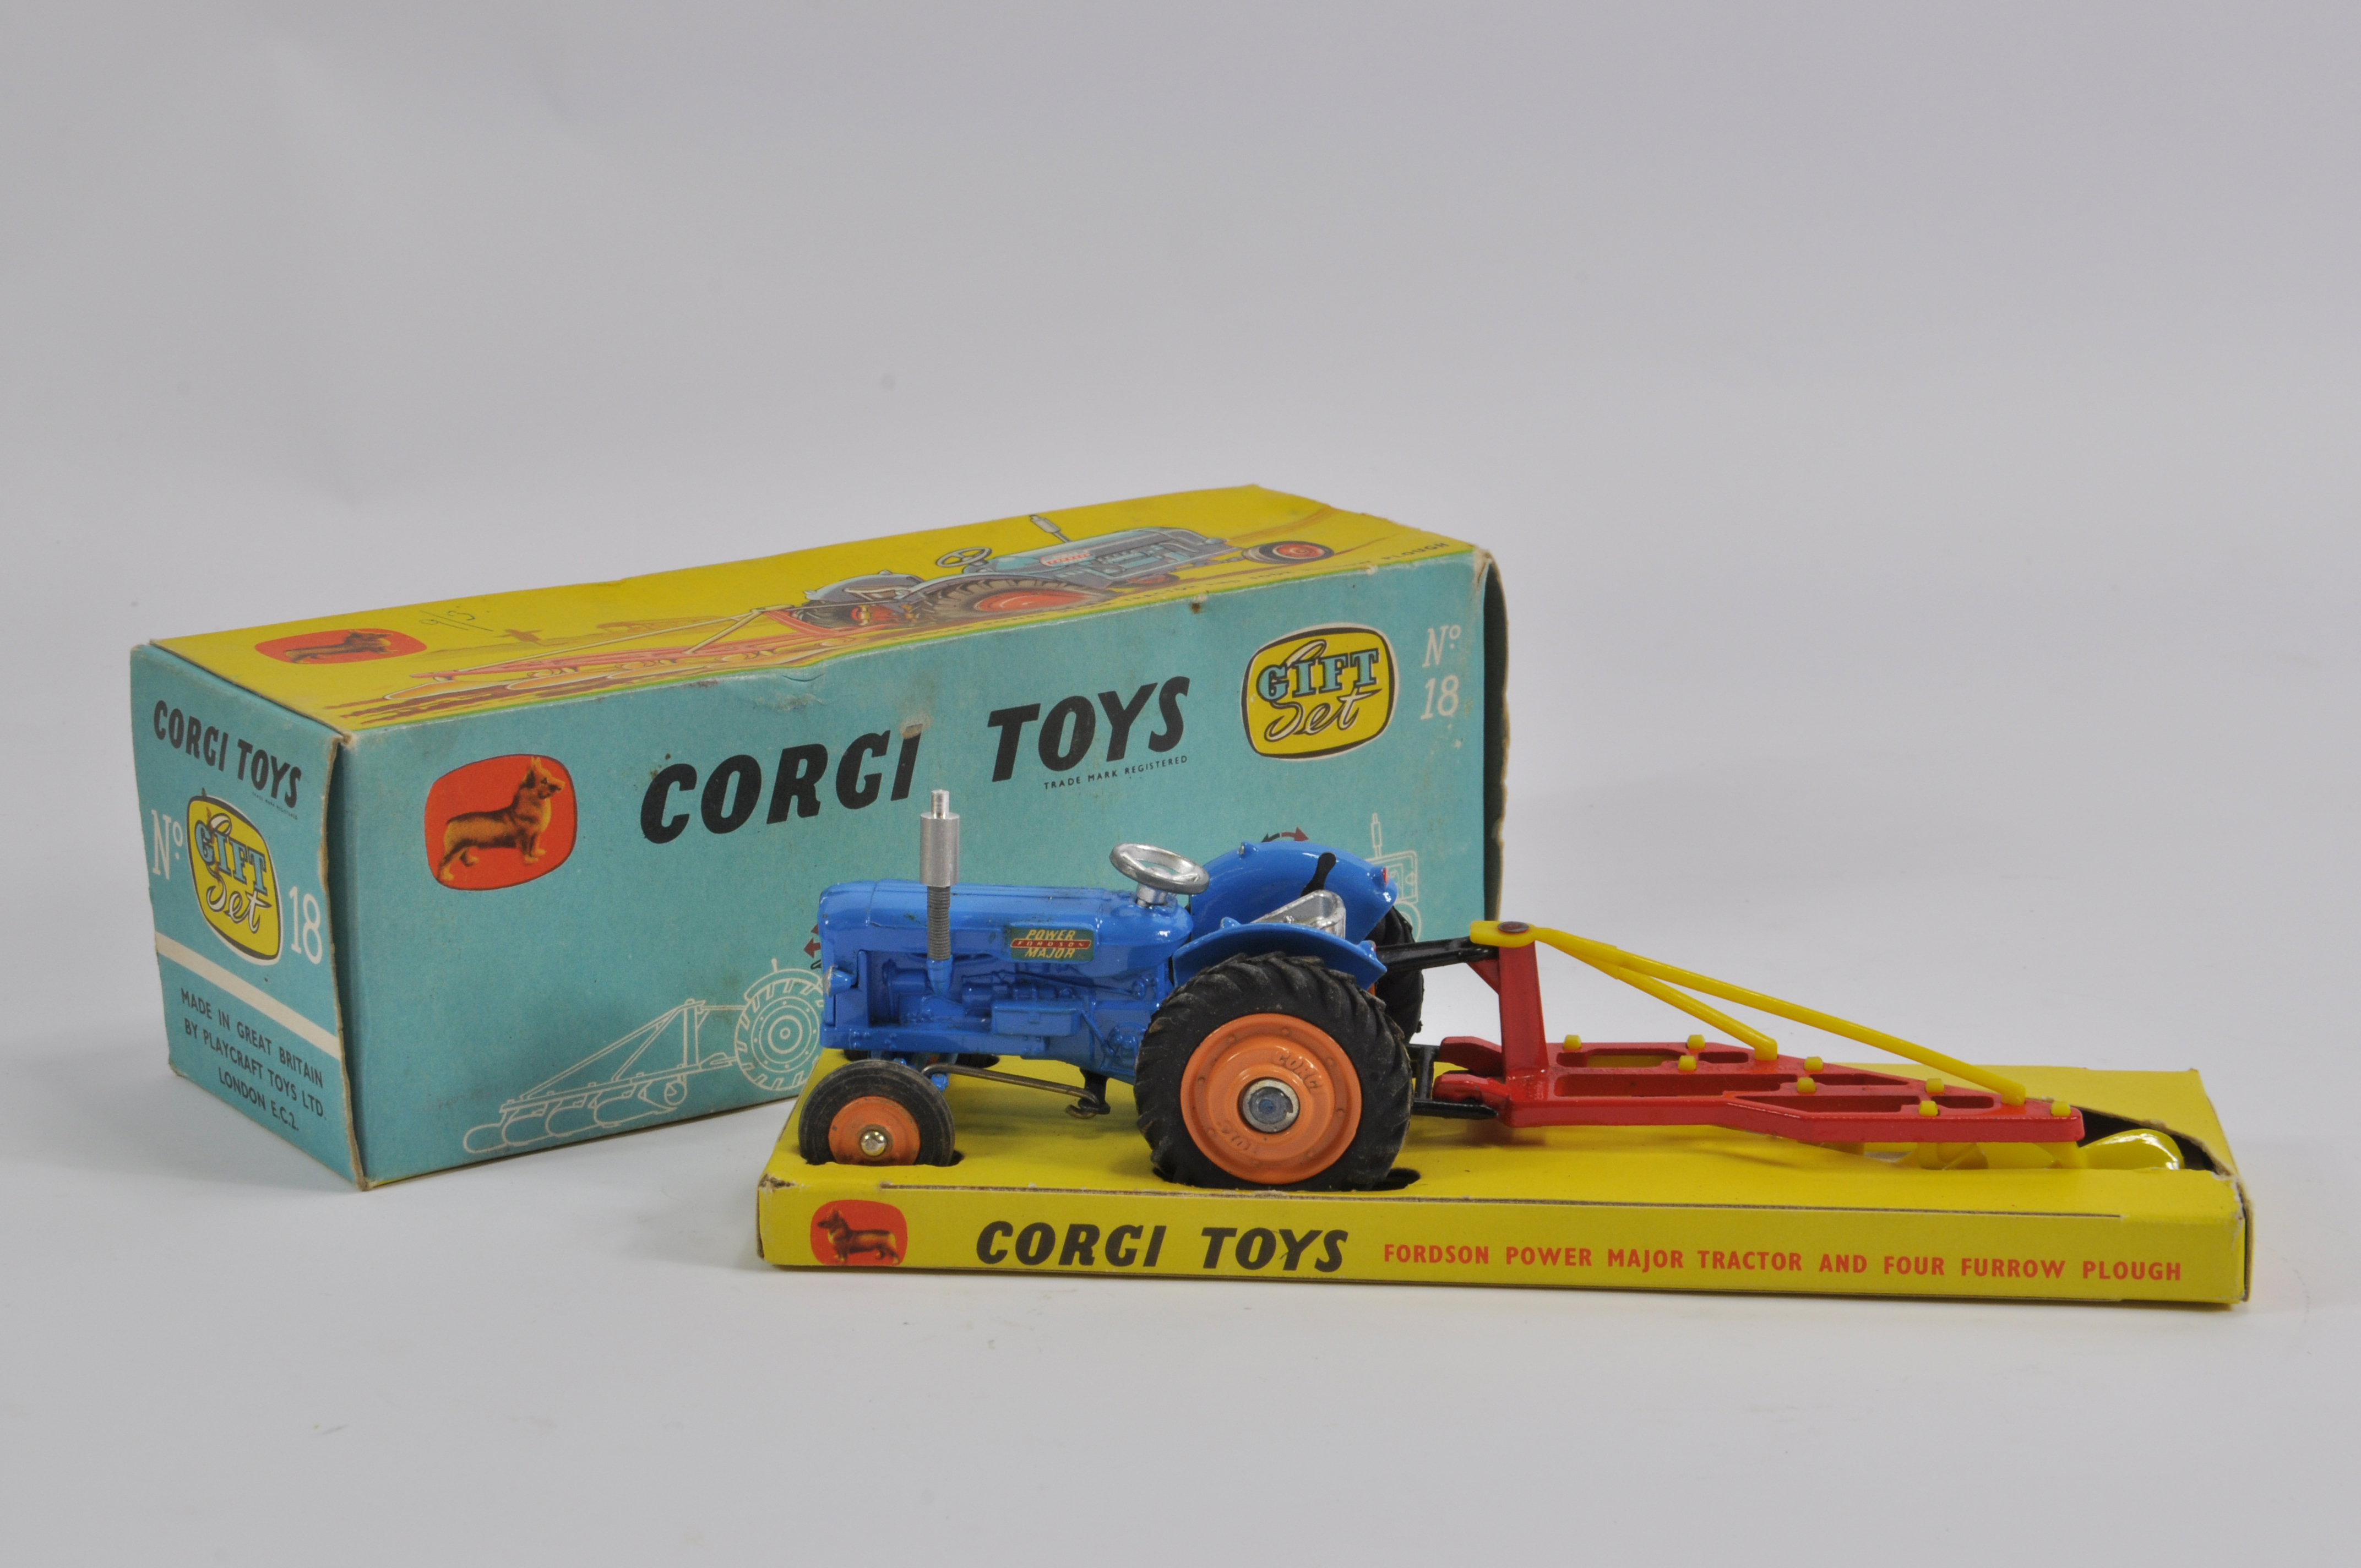 Corgi GS No. 18 Fordson Power Major Tractor and Plough. NM to M in G to VG Box.